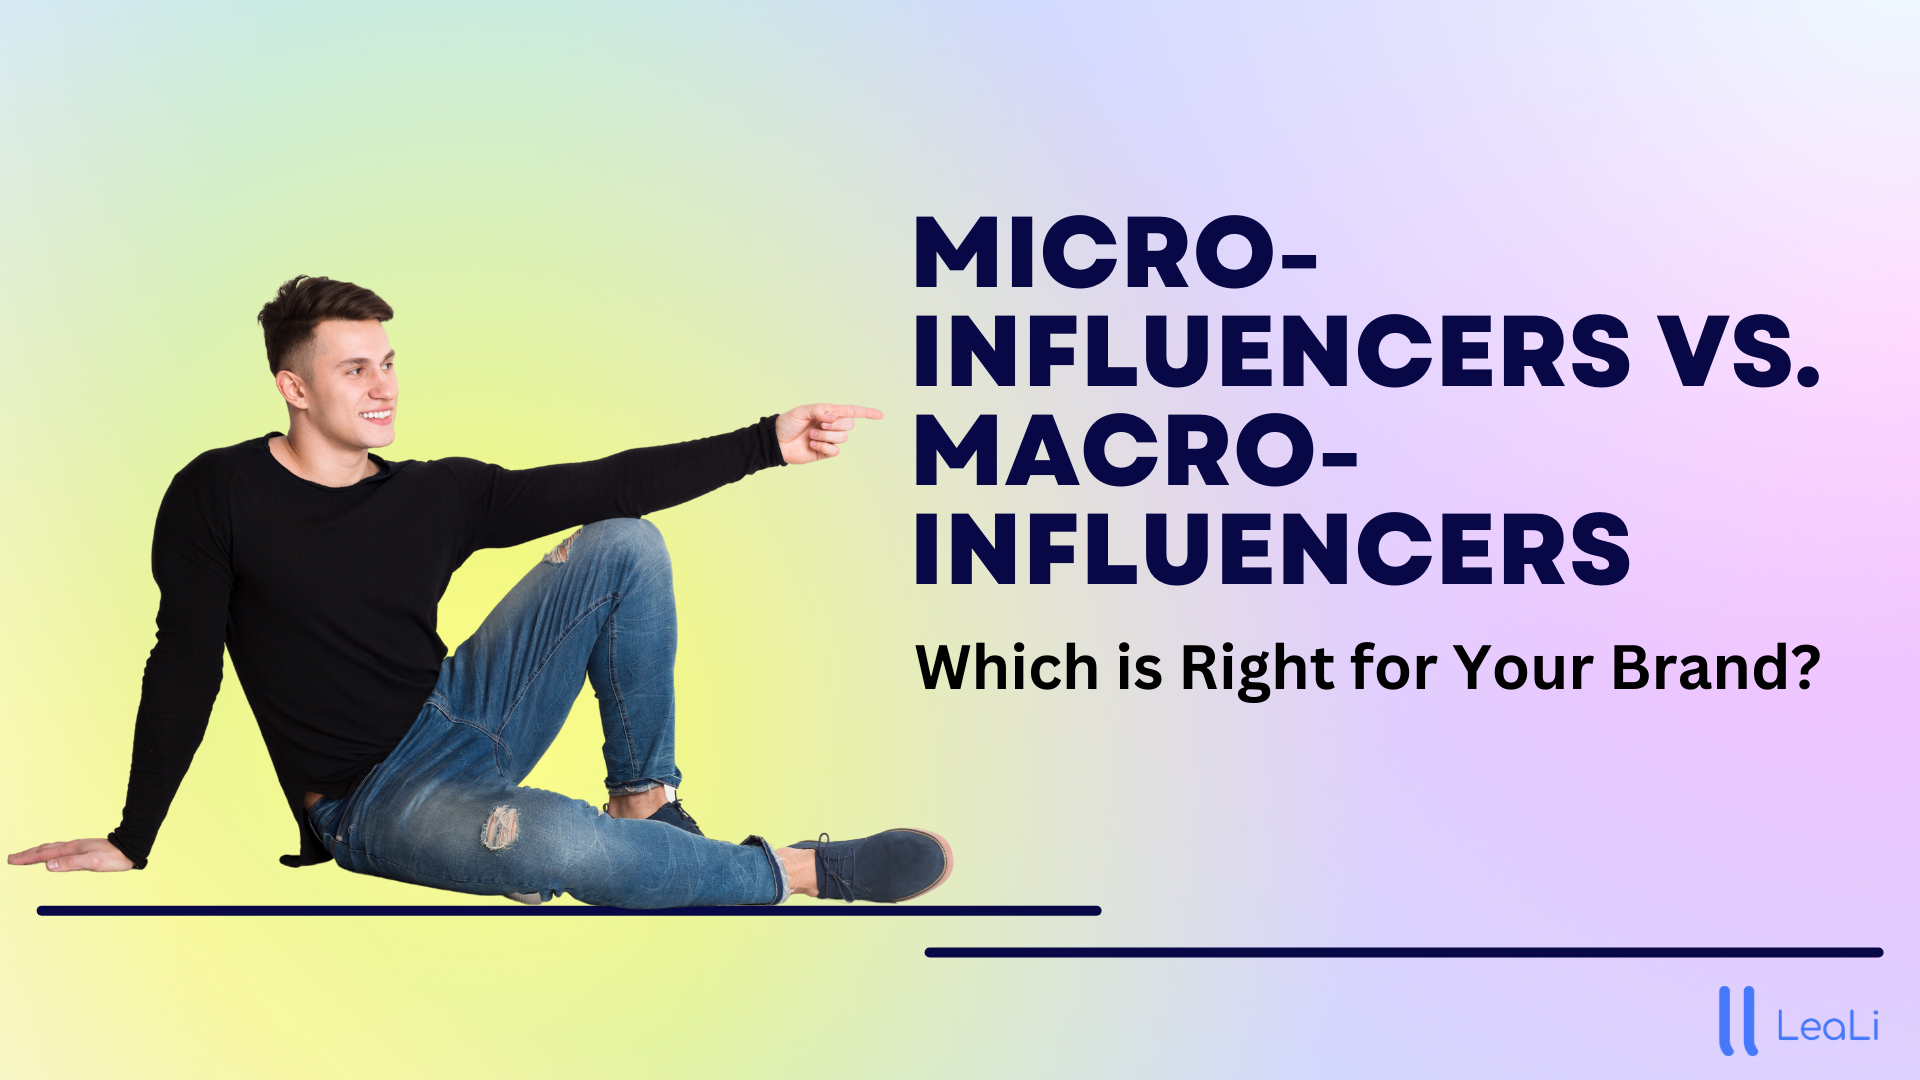 Micro-Influencers vs. Macro-Influencers: Which is Right for Your Brand?